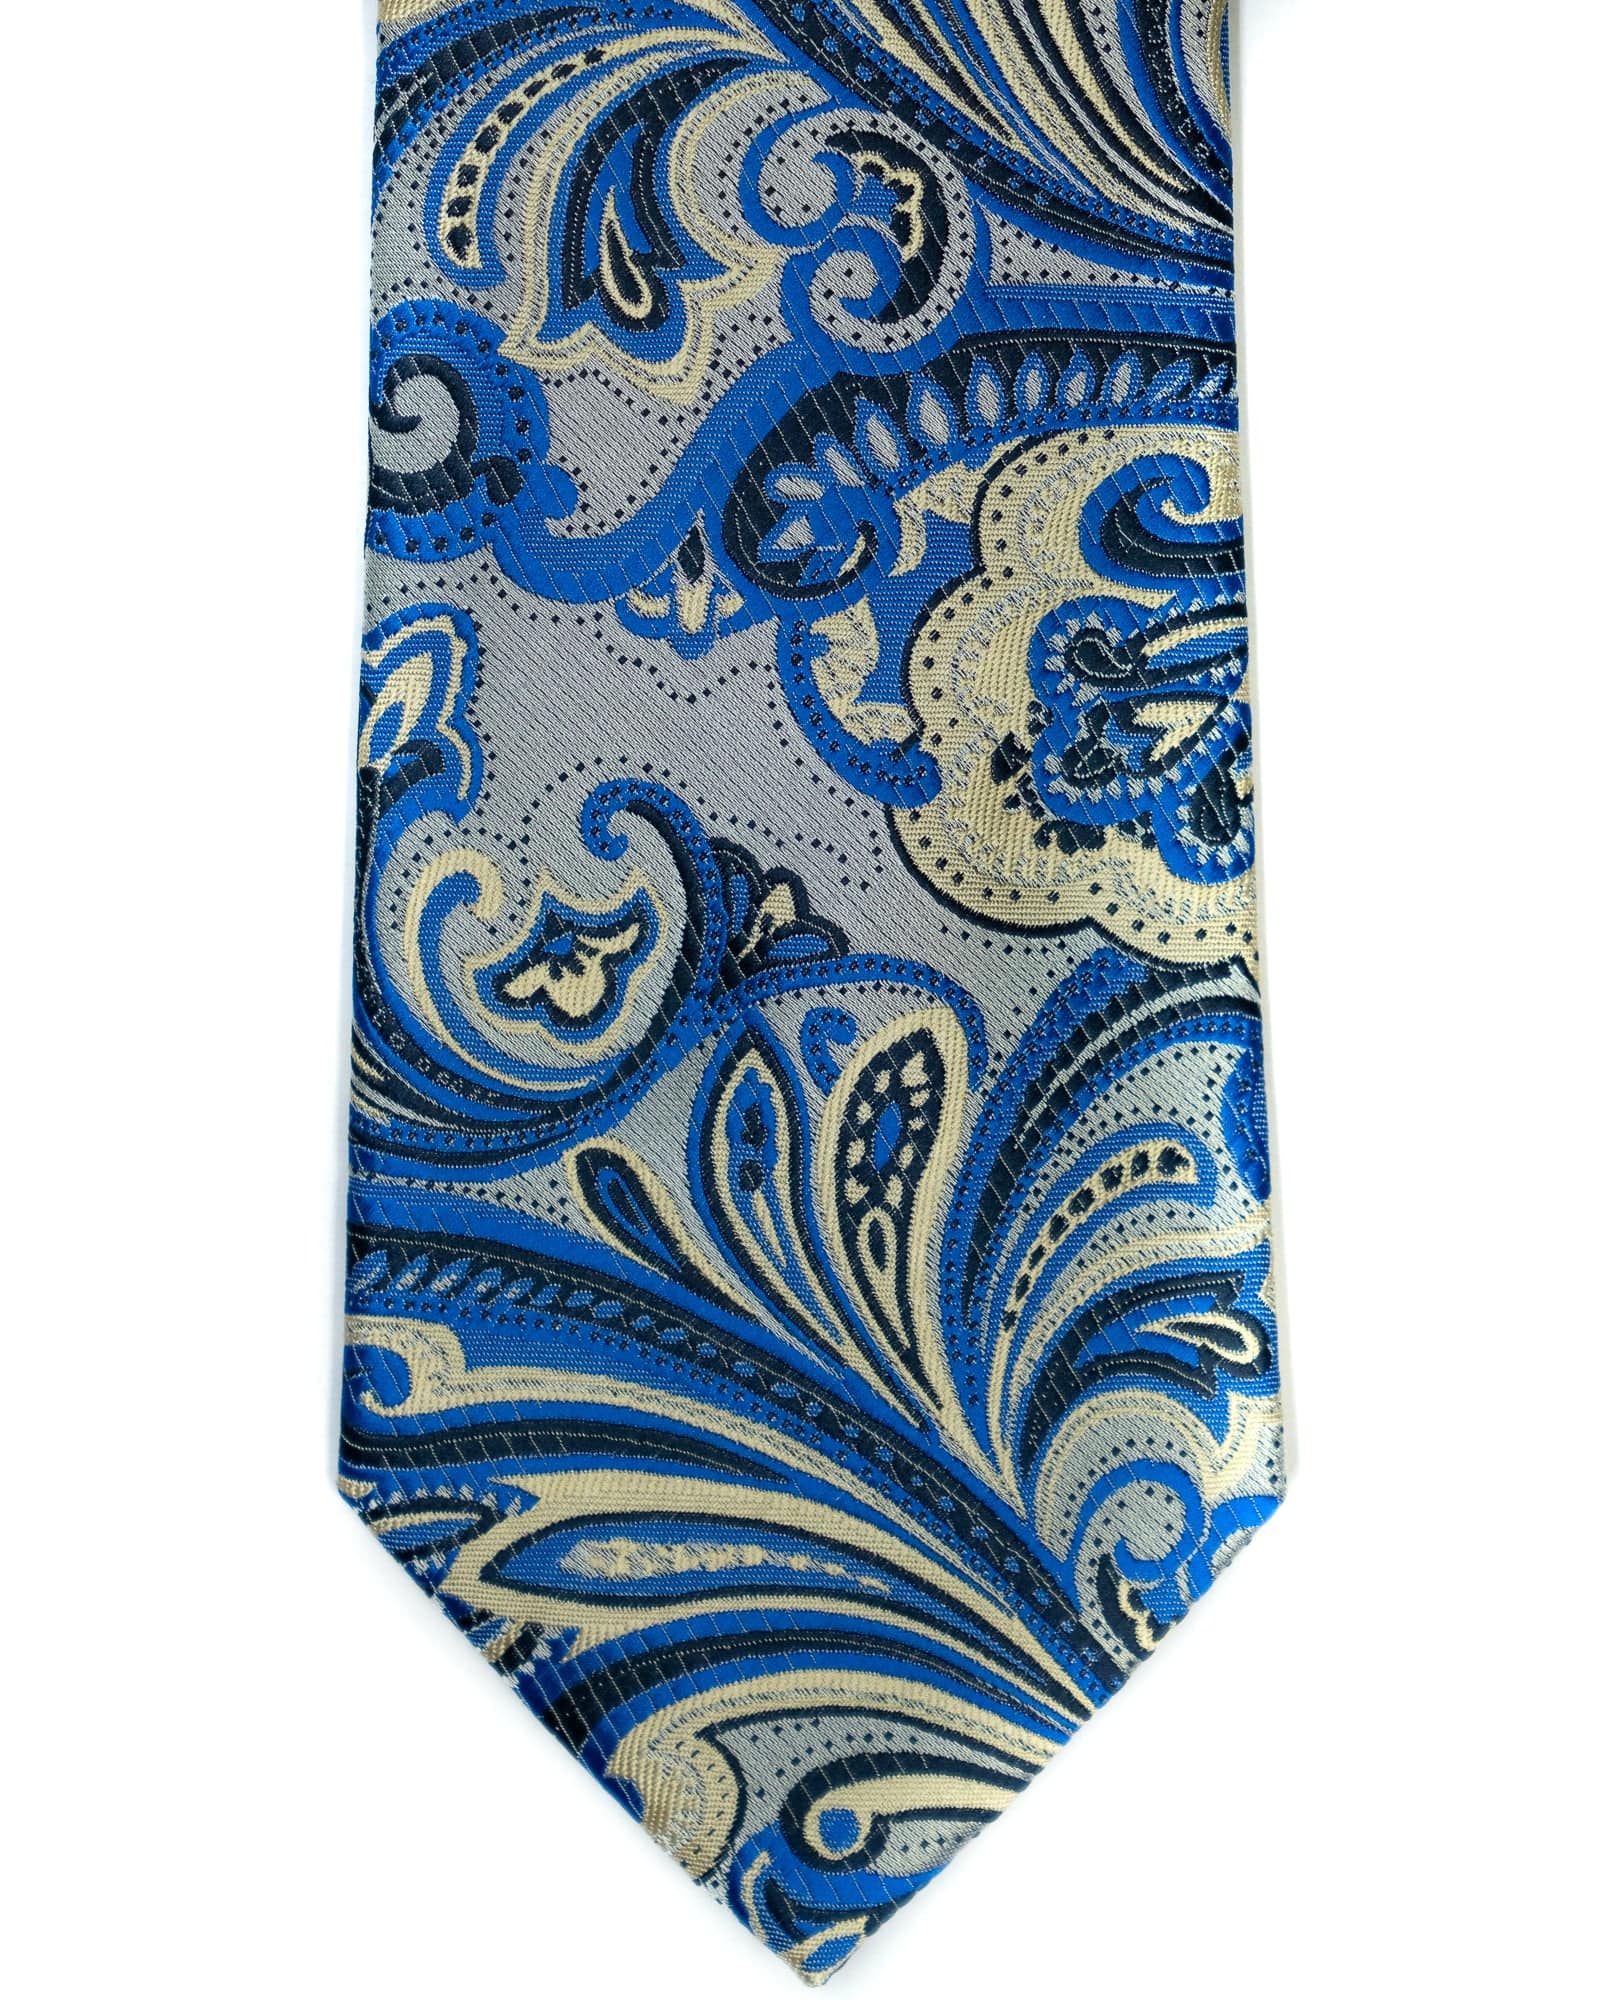 Venturi Uomo Exploded Paisley Tie in Silver with Blue - Rainwater's Men's Clothing and Tuxedo Rental